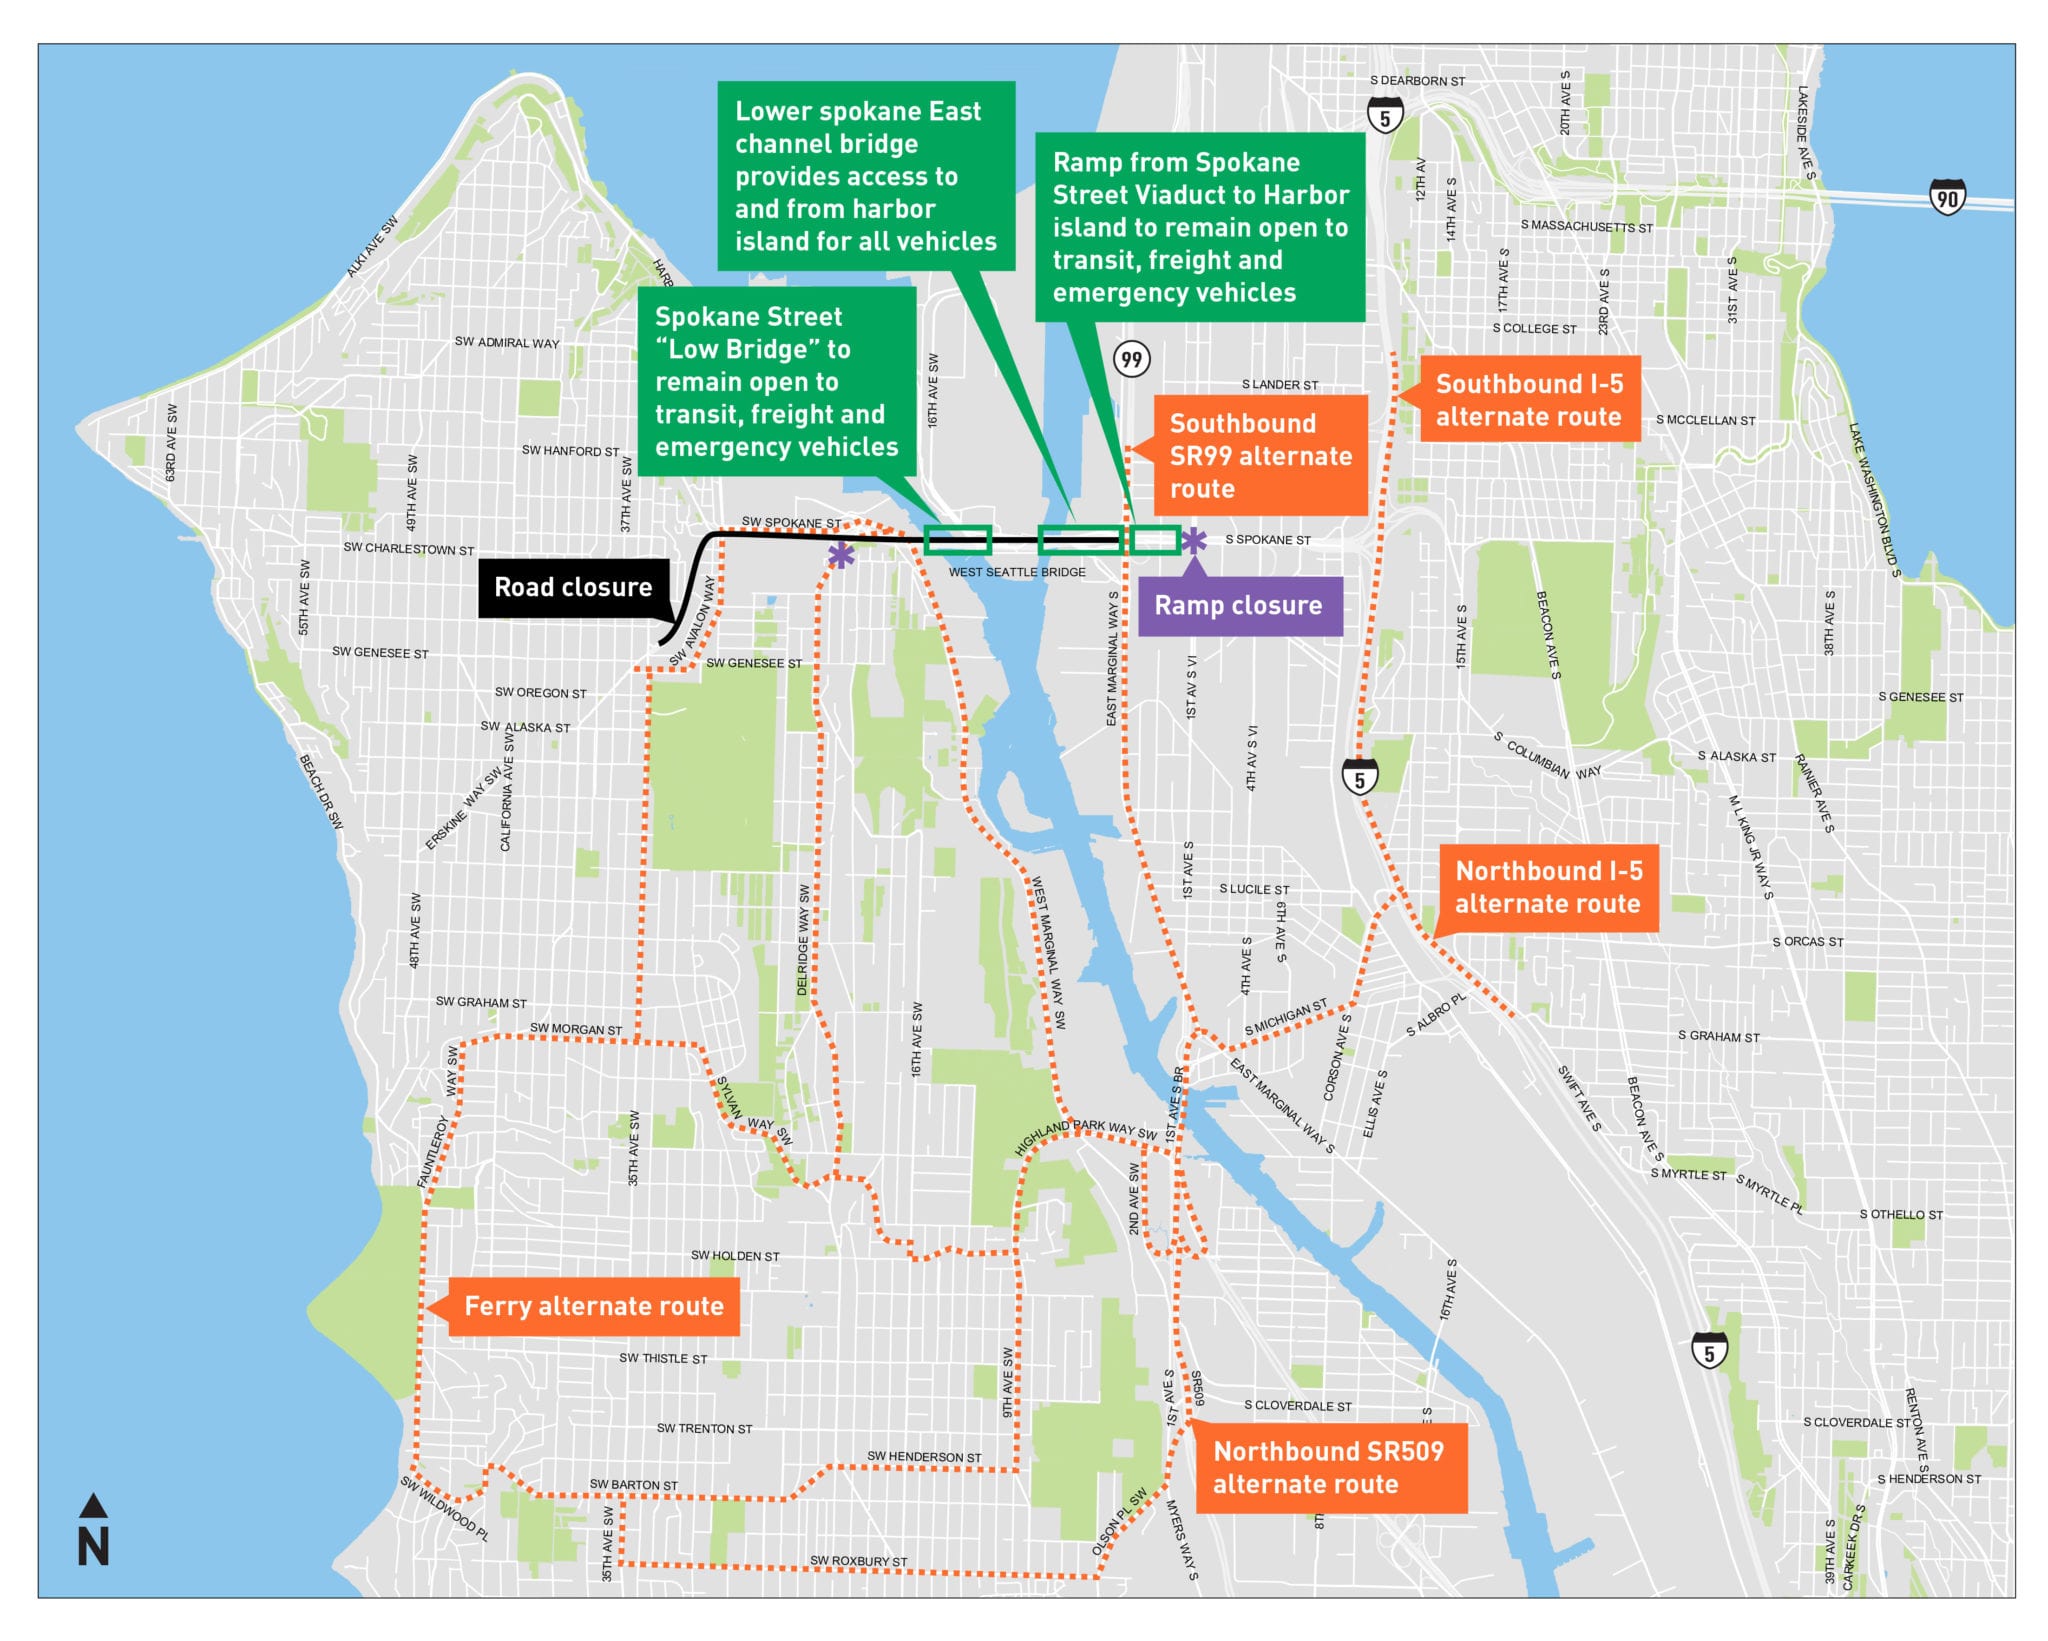 Alternate routes for commuters to take during the closure of the West Seattle Bridge.